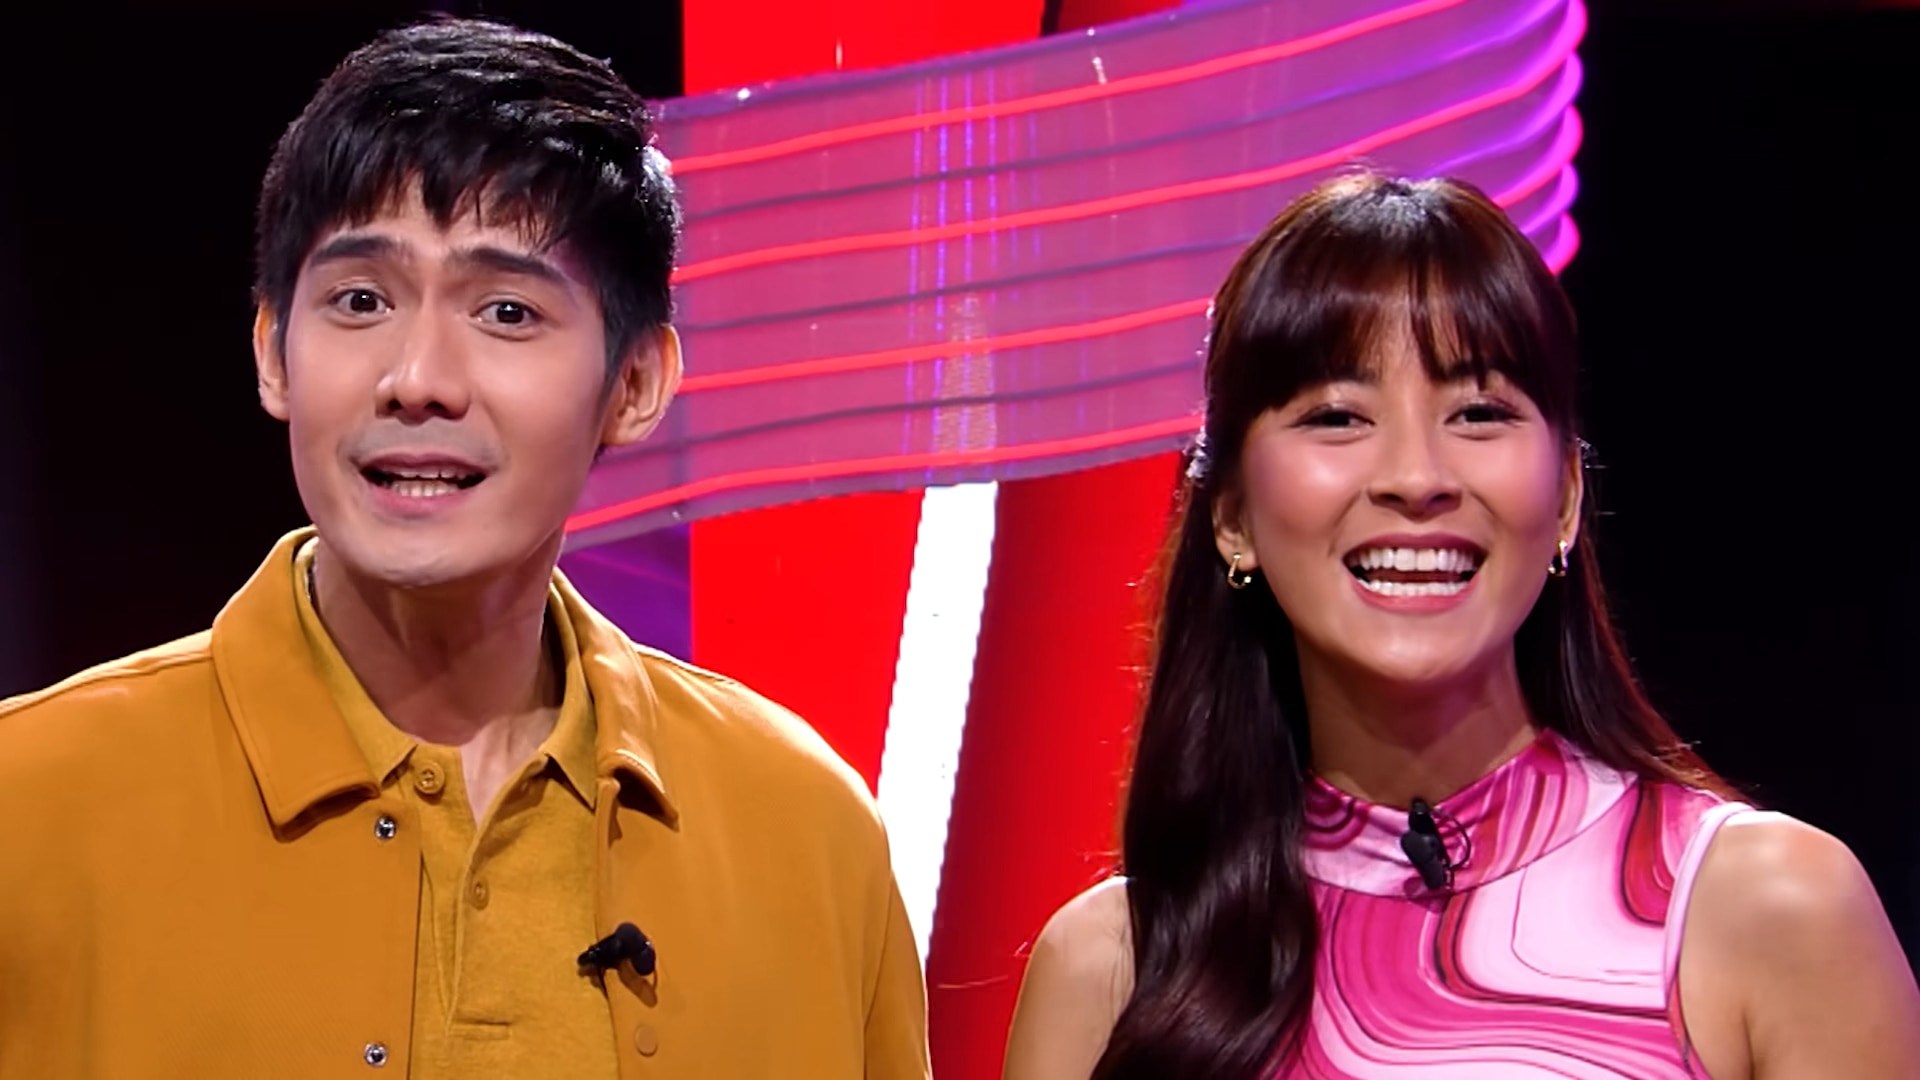 BIANCA AND ROBI AS NEW HOSTS